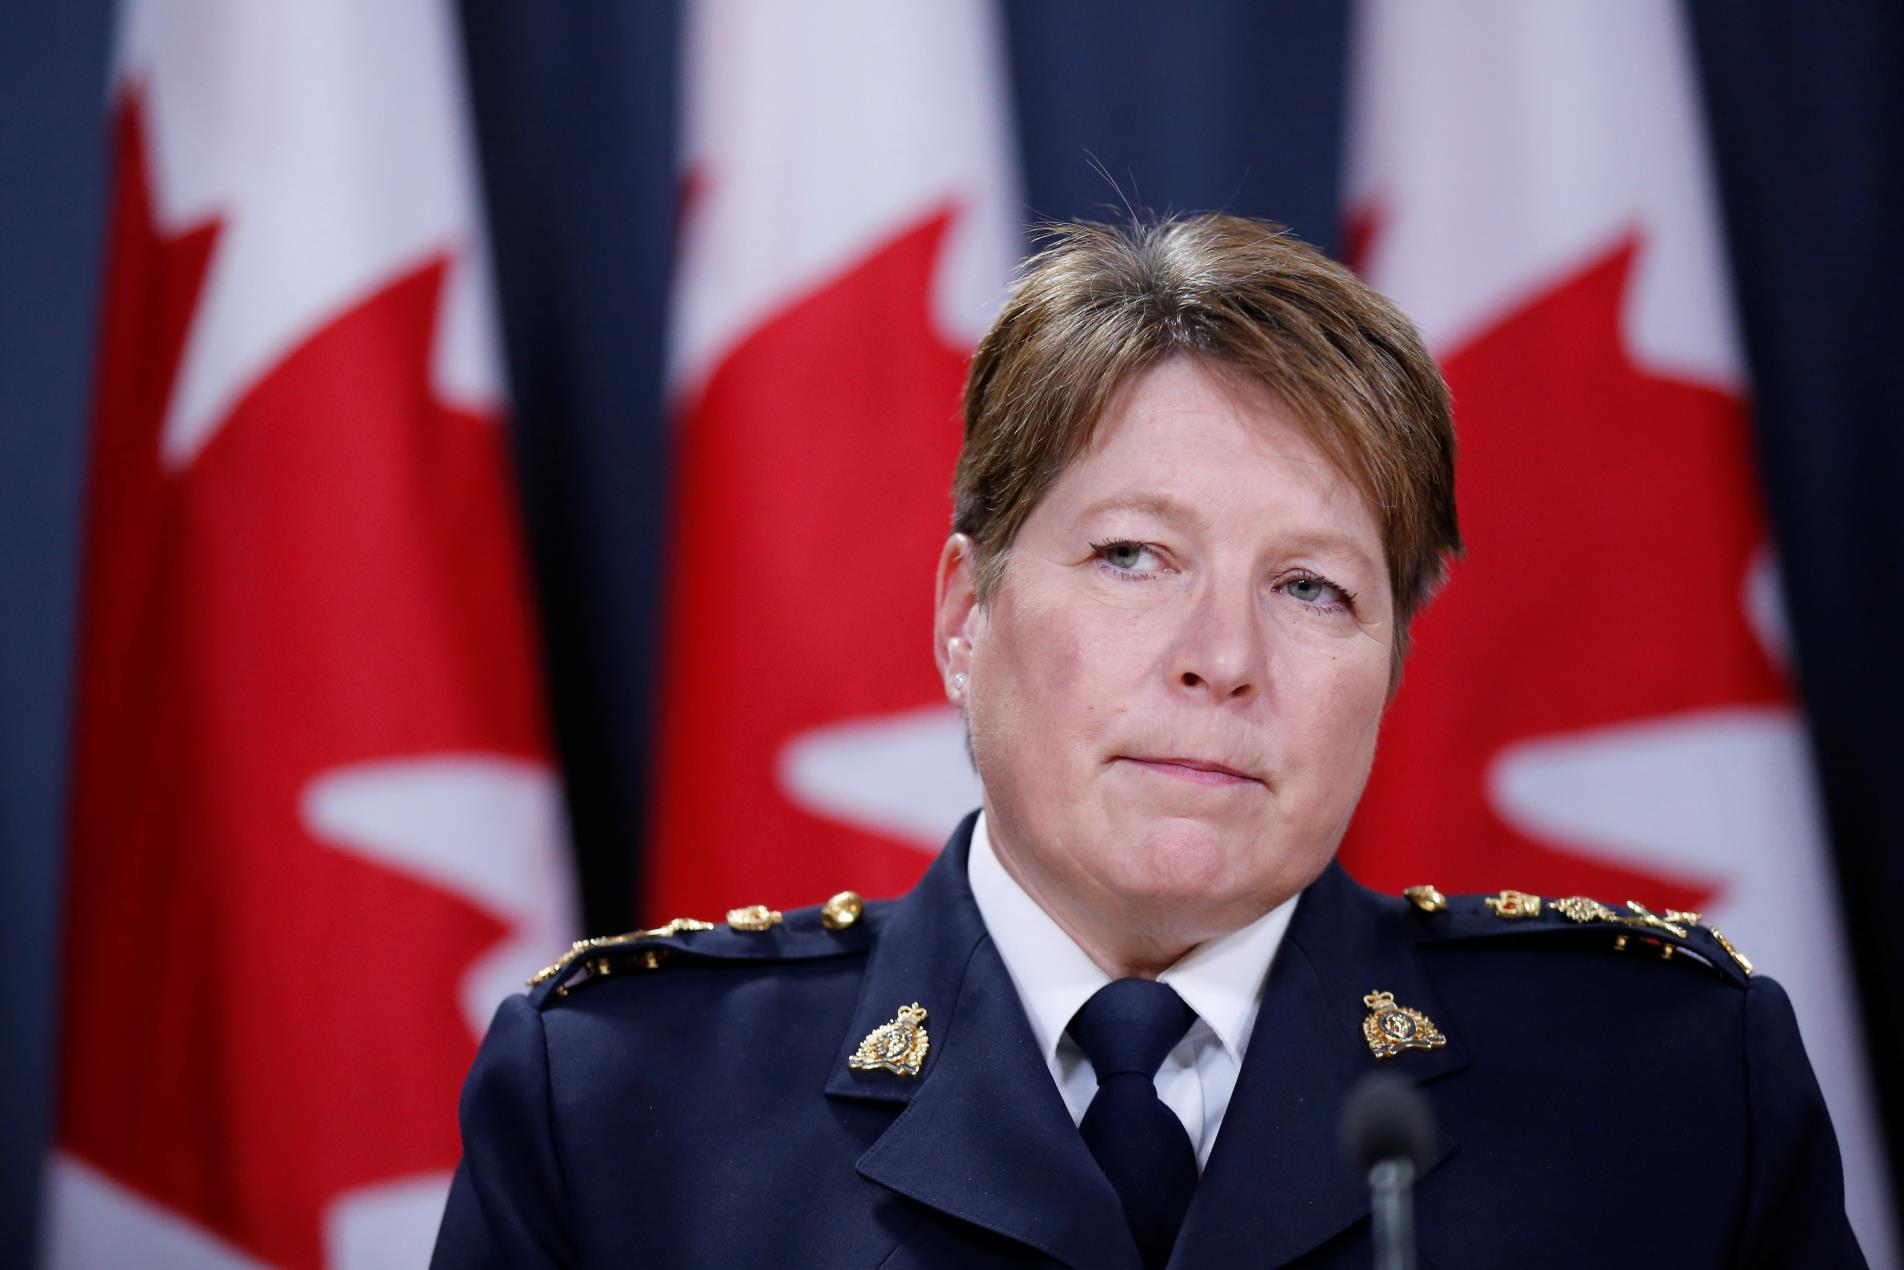 Royal Canadian Mounted Police Commissio<em></em>ner Brenda Lucki attends a news co<em></em>nference in Ottawa, Ontario, Canada, May 7, 2018. REUTERS/Chris Wattie